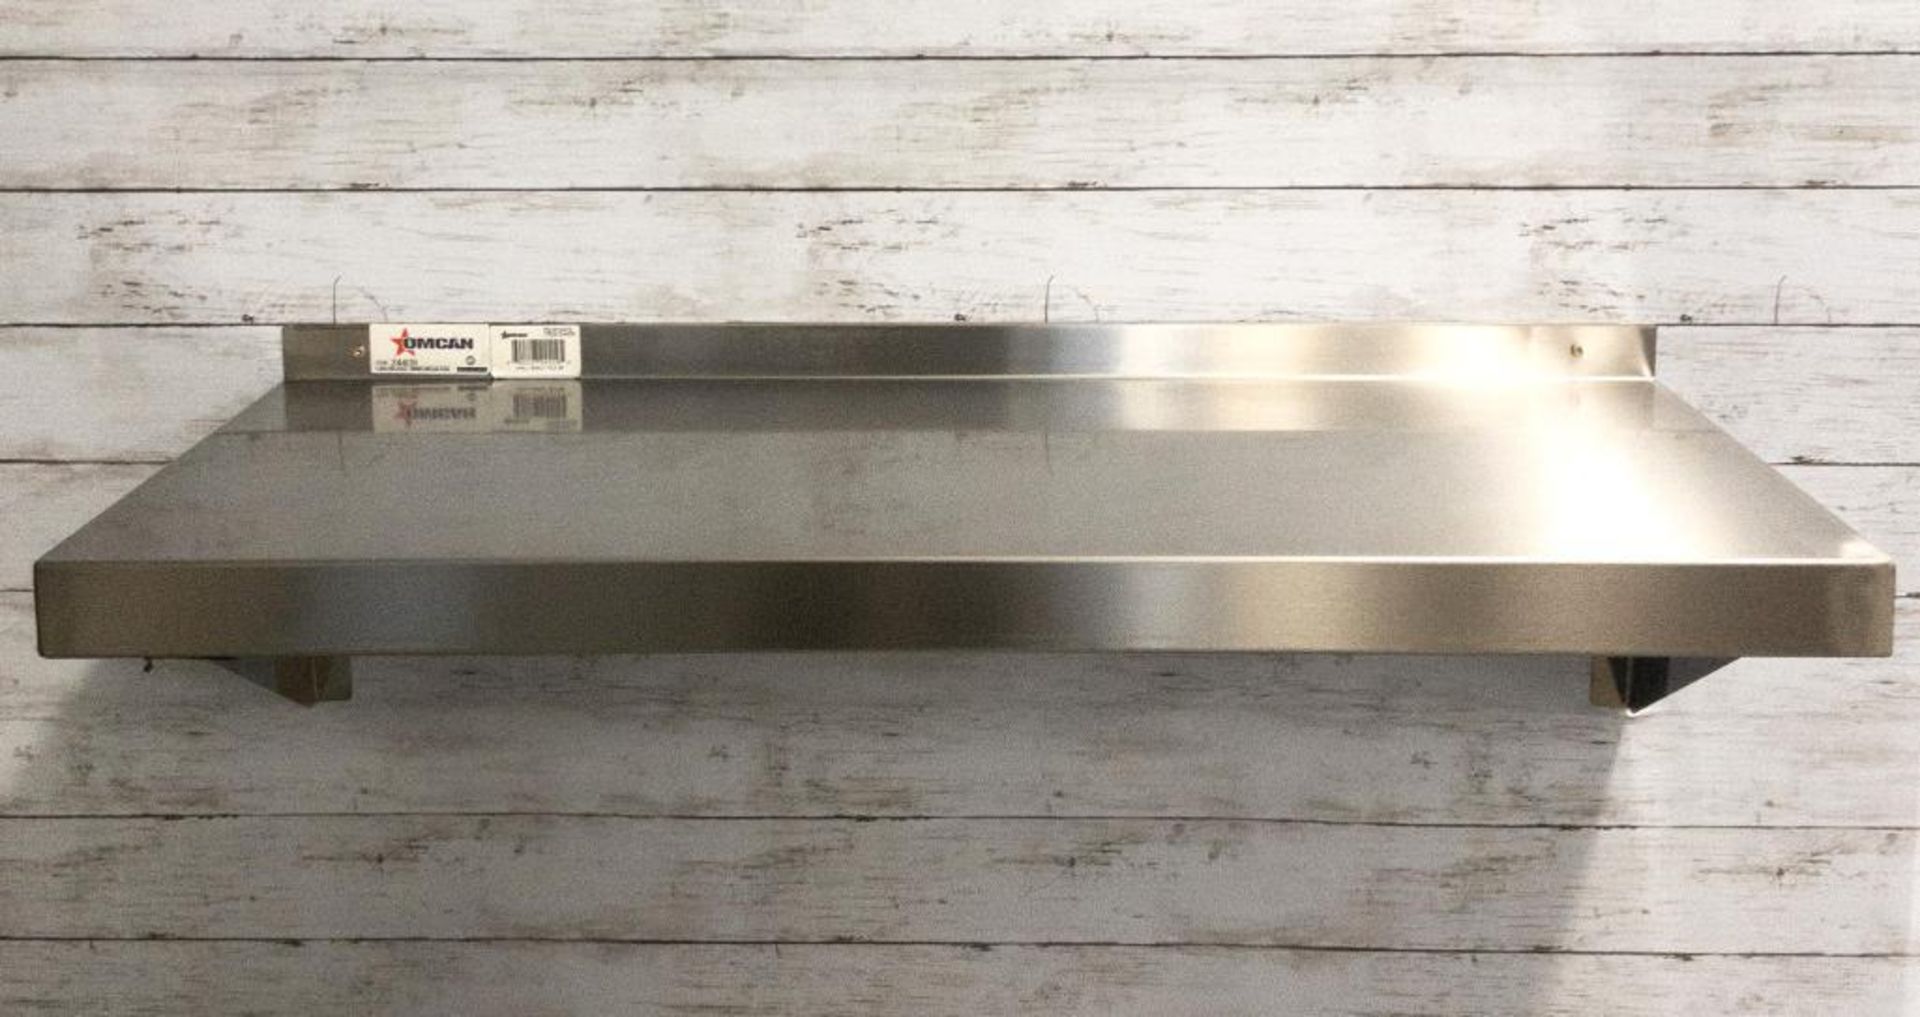 36" X 16" STAINLESS STEEL WALL SHELF - OMCAN 24409 - NEW - Image 2 of 13